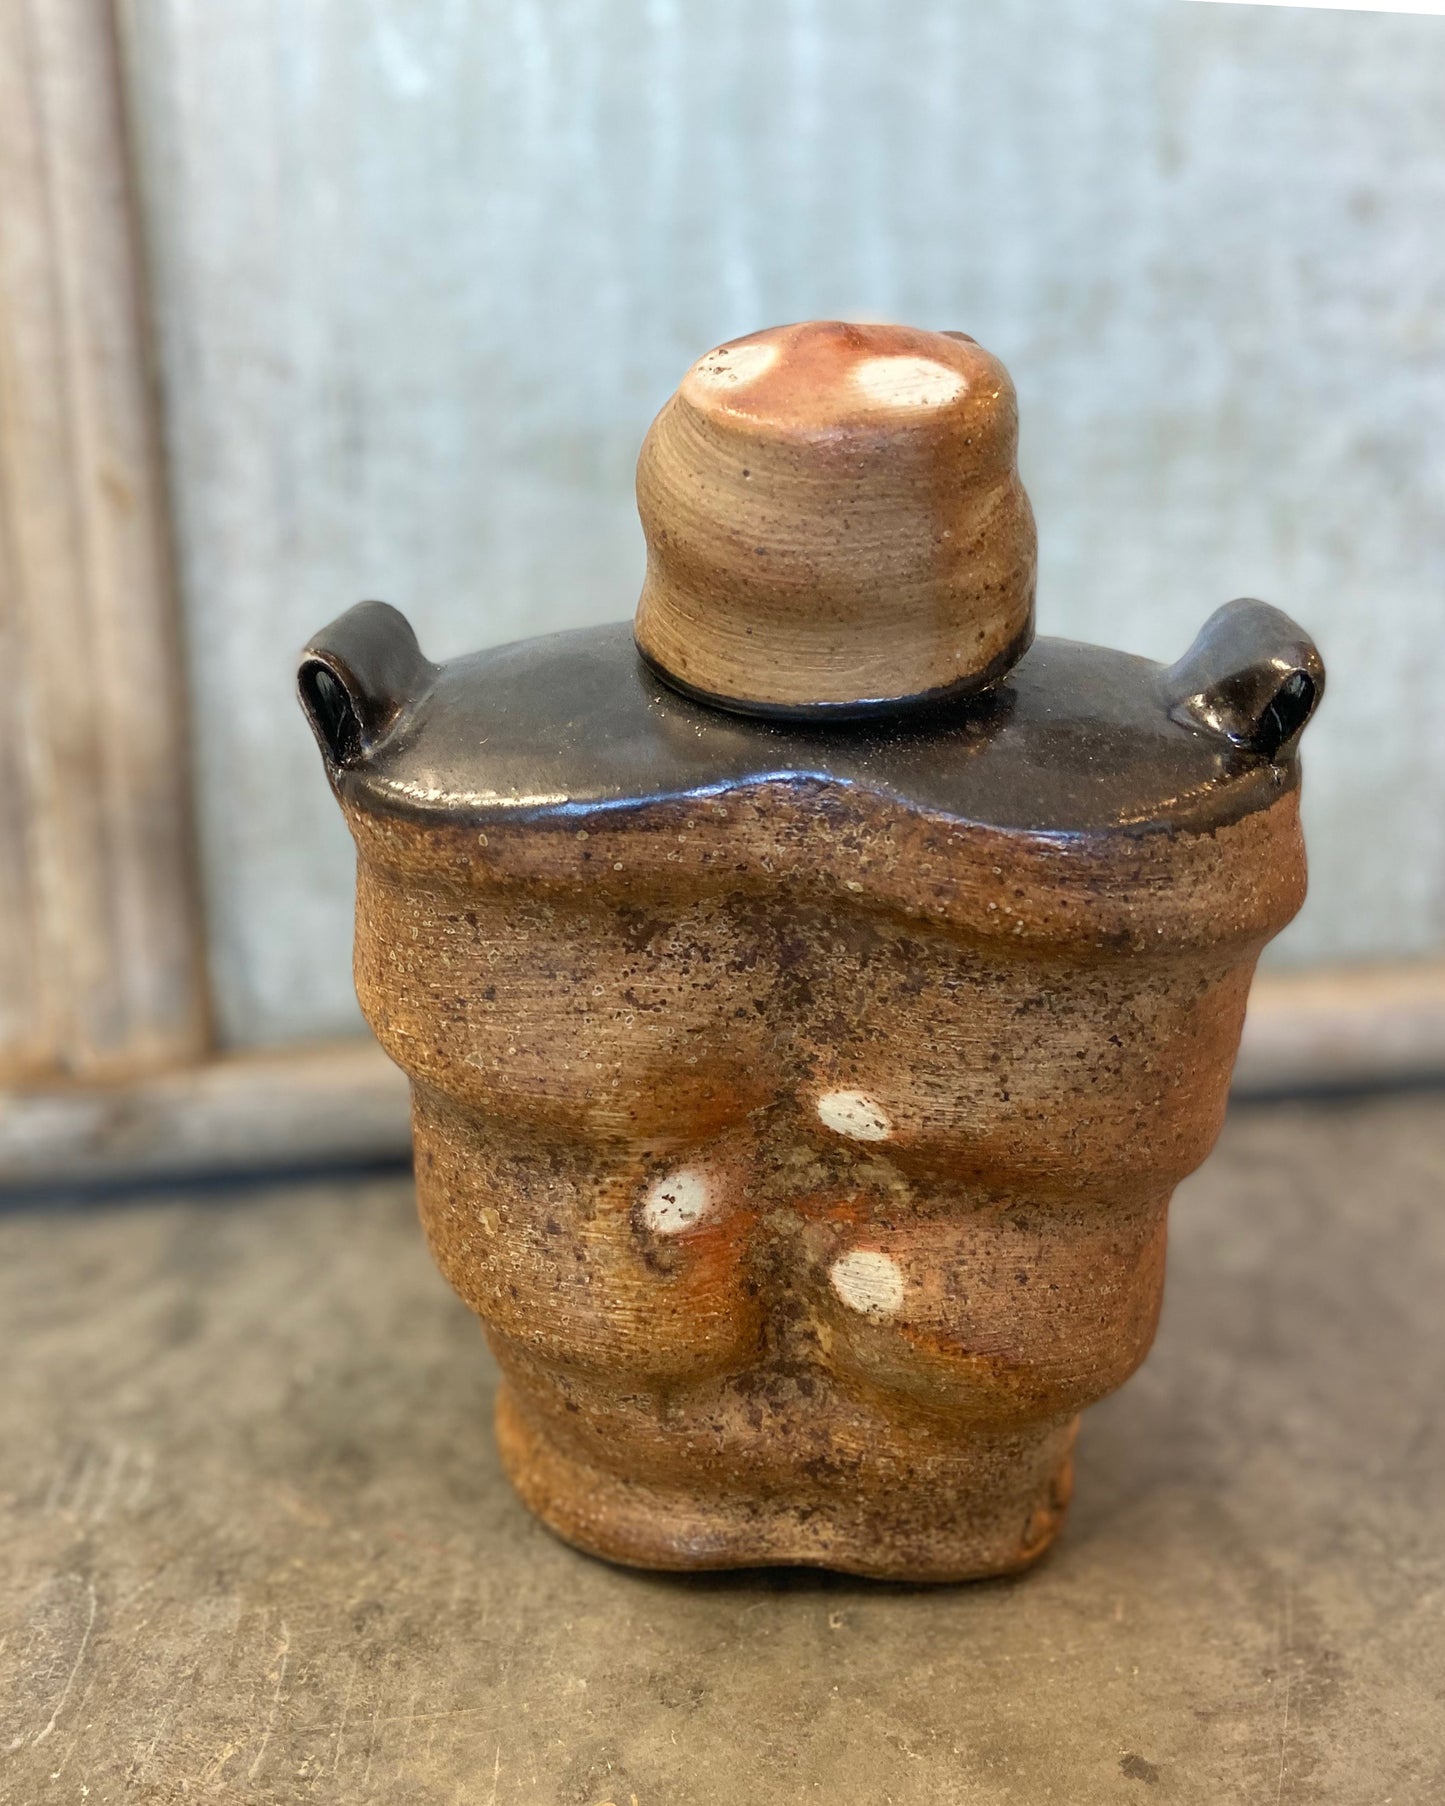 Wood-fired Stoneware Whiskey Flask with black liner glaze and black shoulders. Handmade. One-of-a-kind ceramic flask. 7" tall. 5.5" wide. 3" deep.  View from above and back.